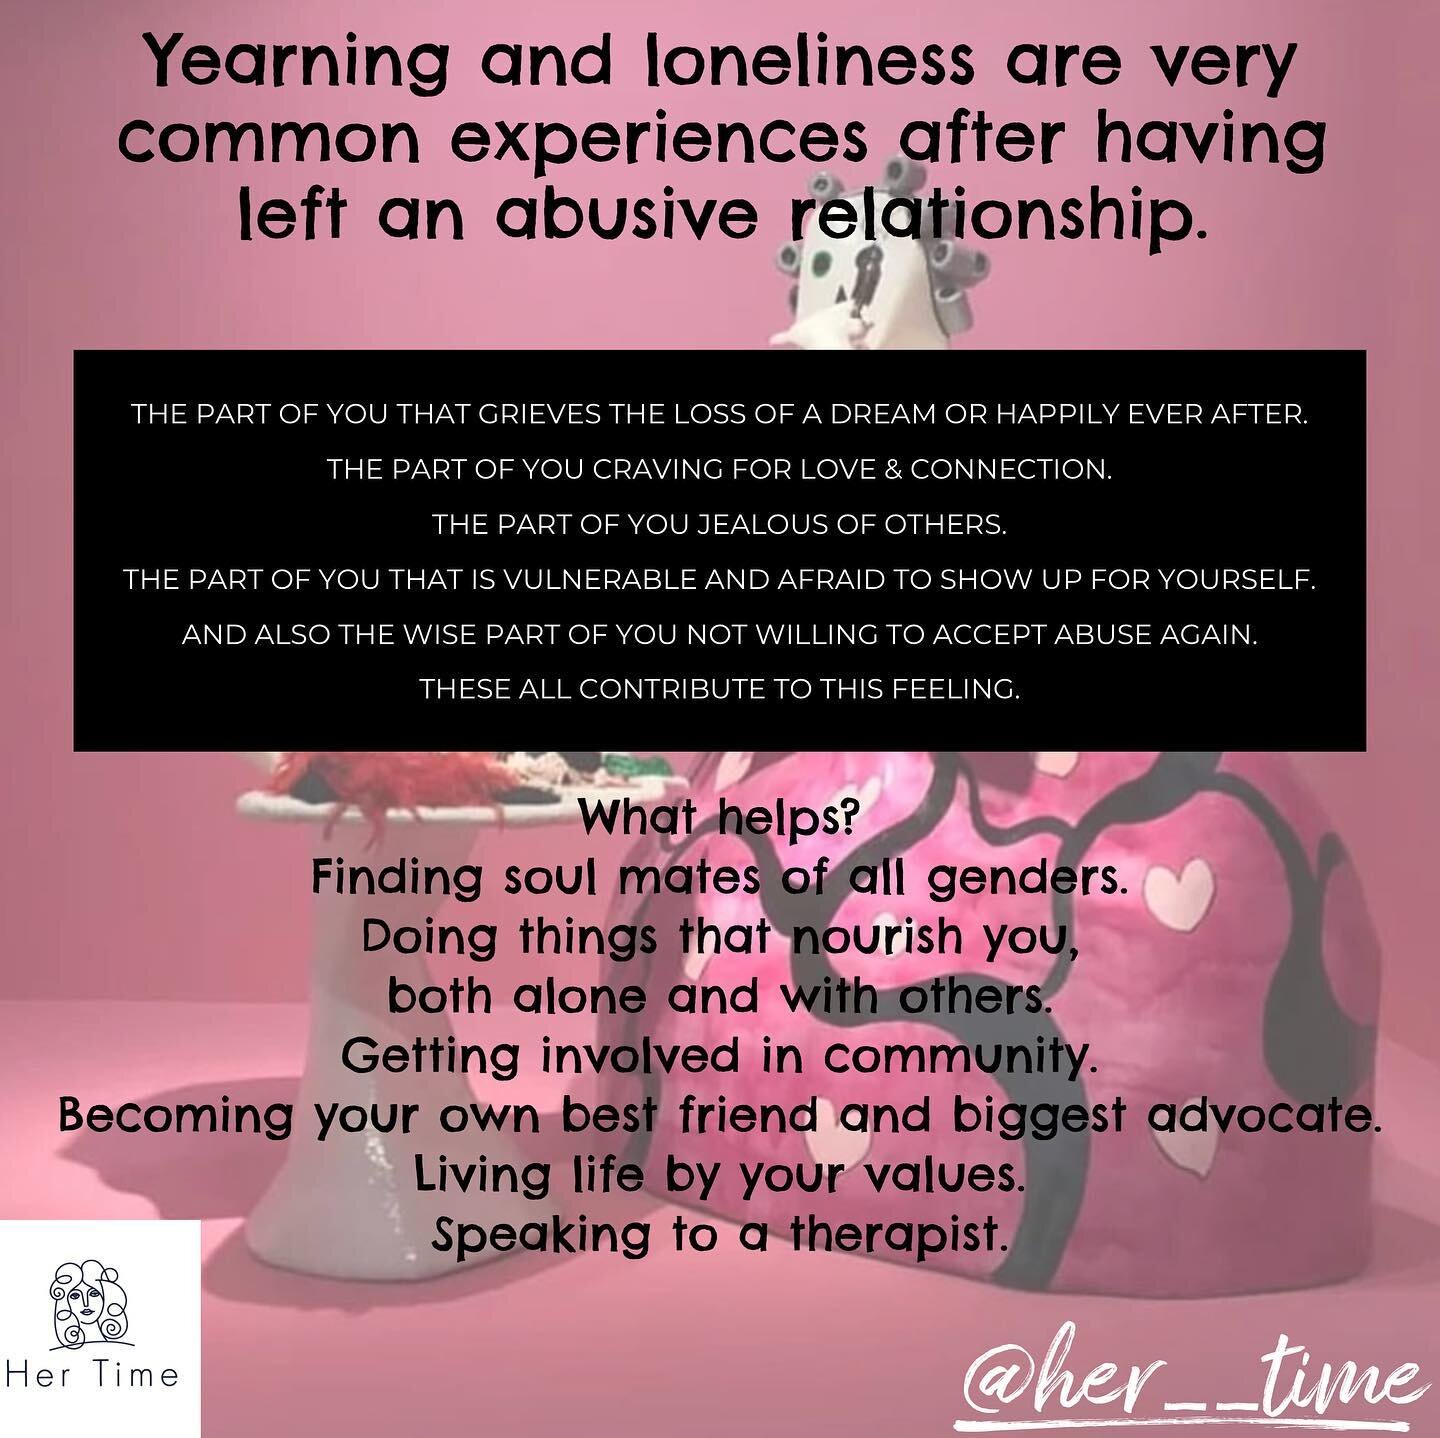 The part of you yearning for what is lost or the part of you who feels very lonely, need your full attention and care after a relationship breakdown, particularly an abusive one. 

Trauma bonds, betrayal trauma and a fragmented sense of self as a res